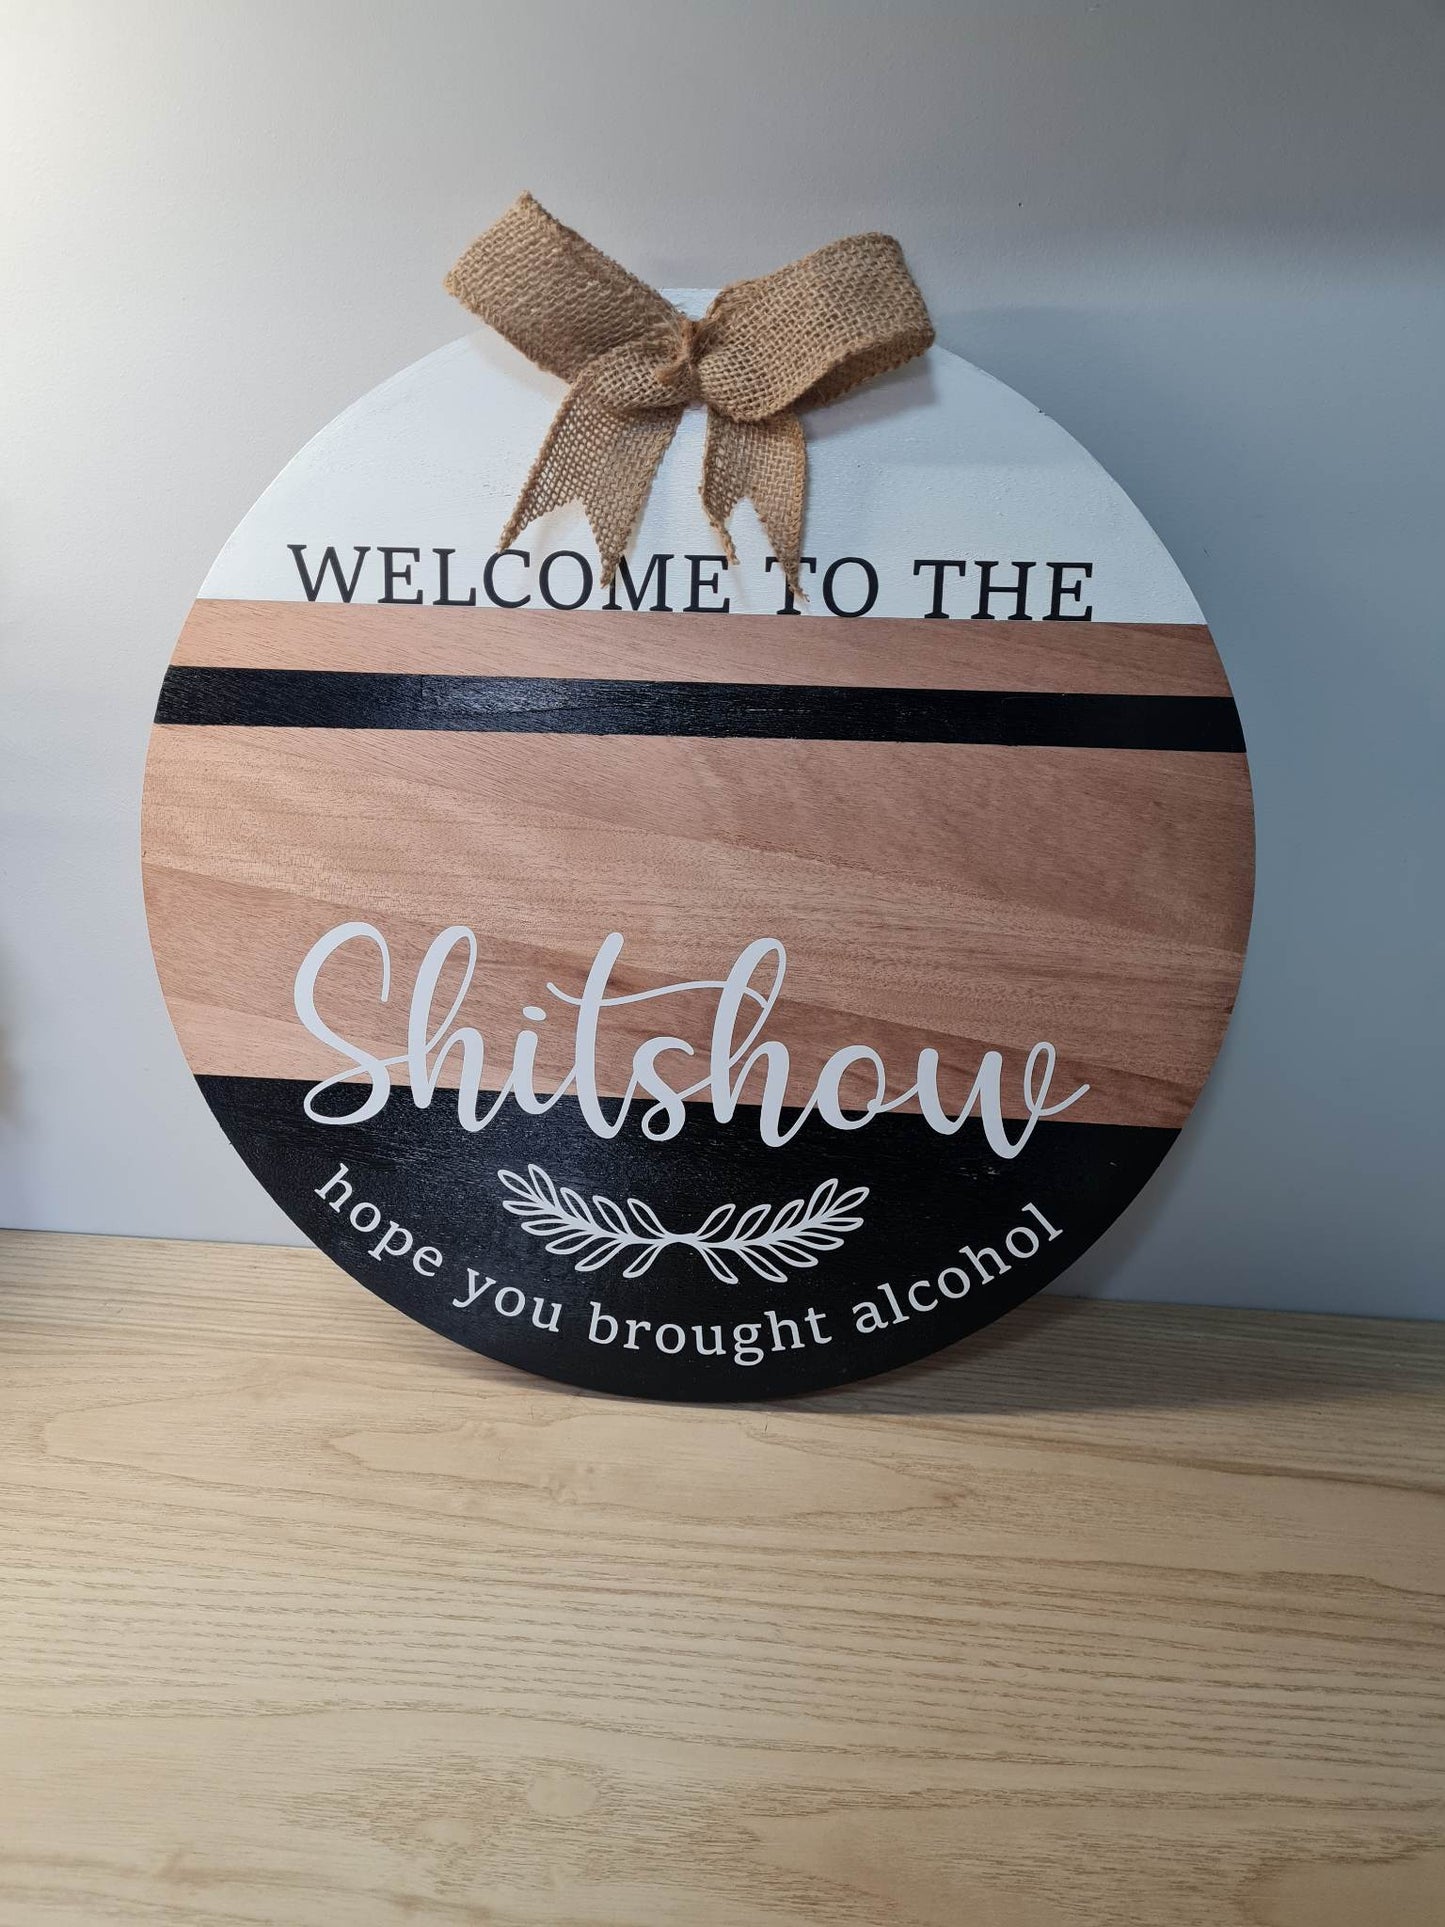 Welcome to the Shitshow Sign